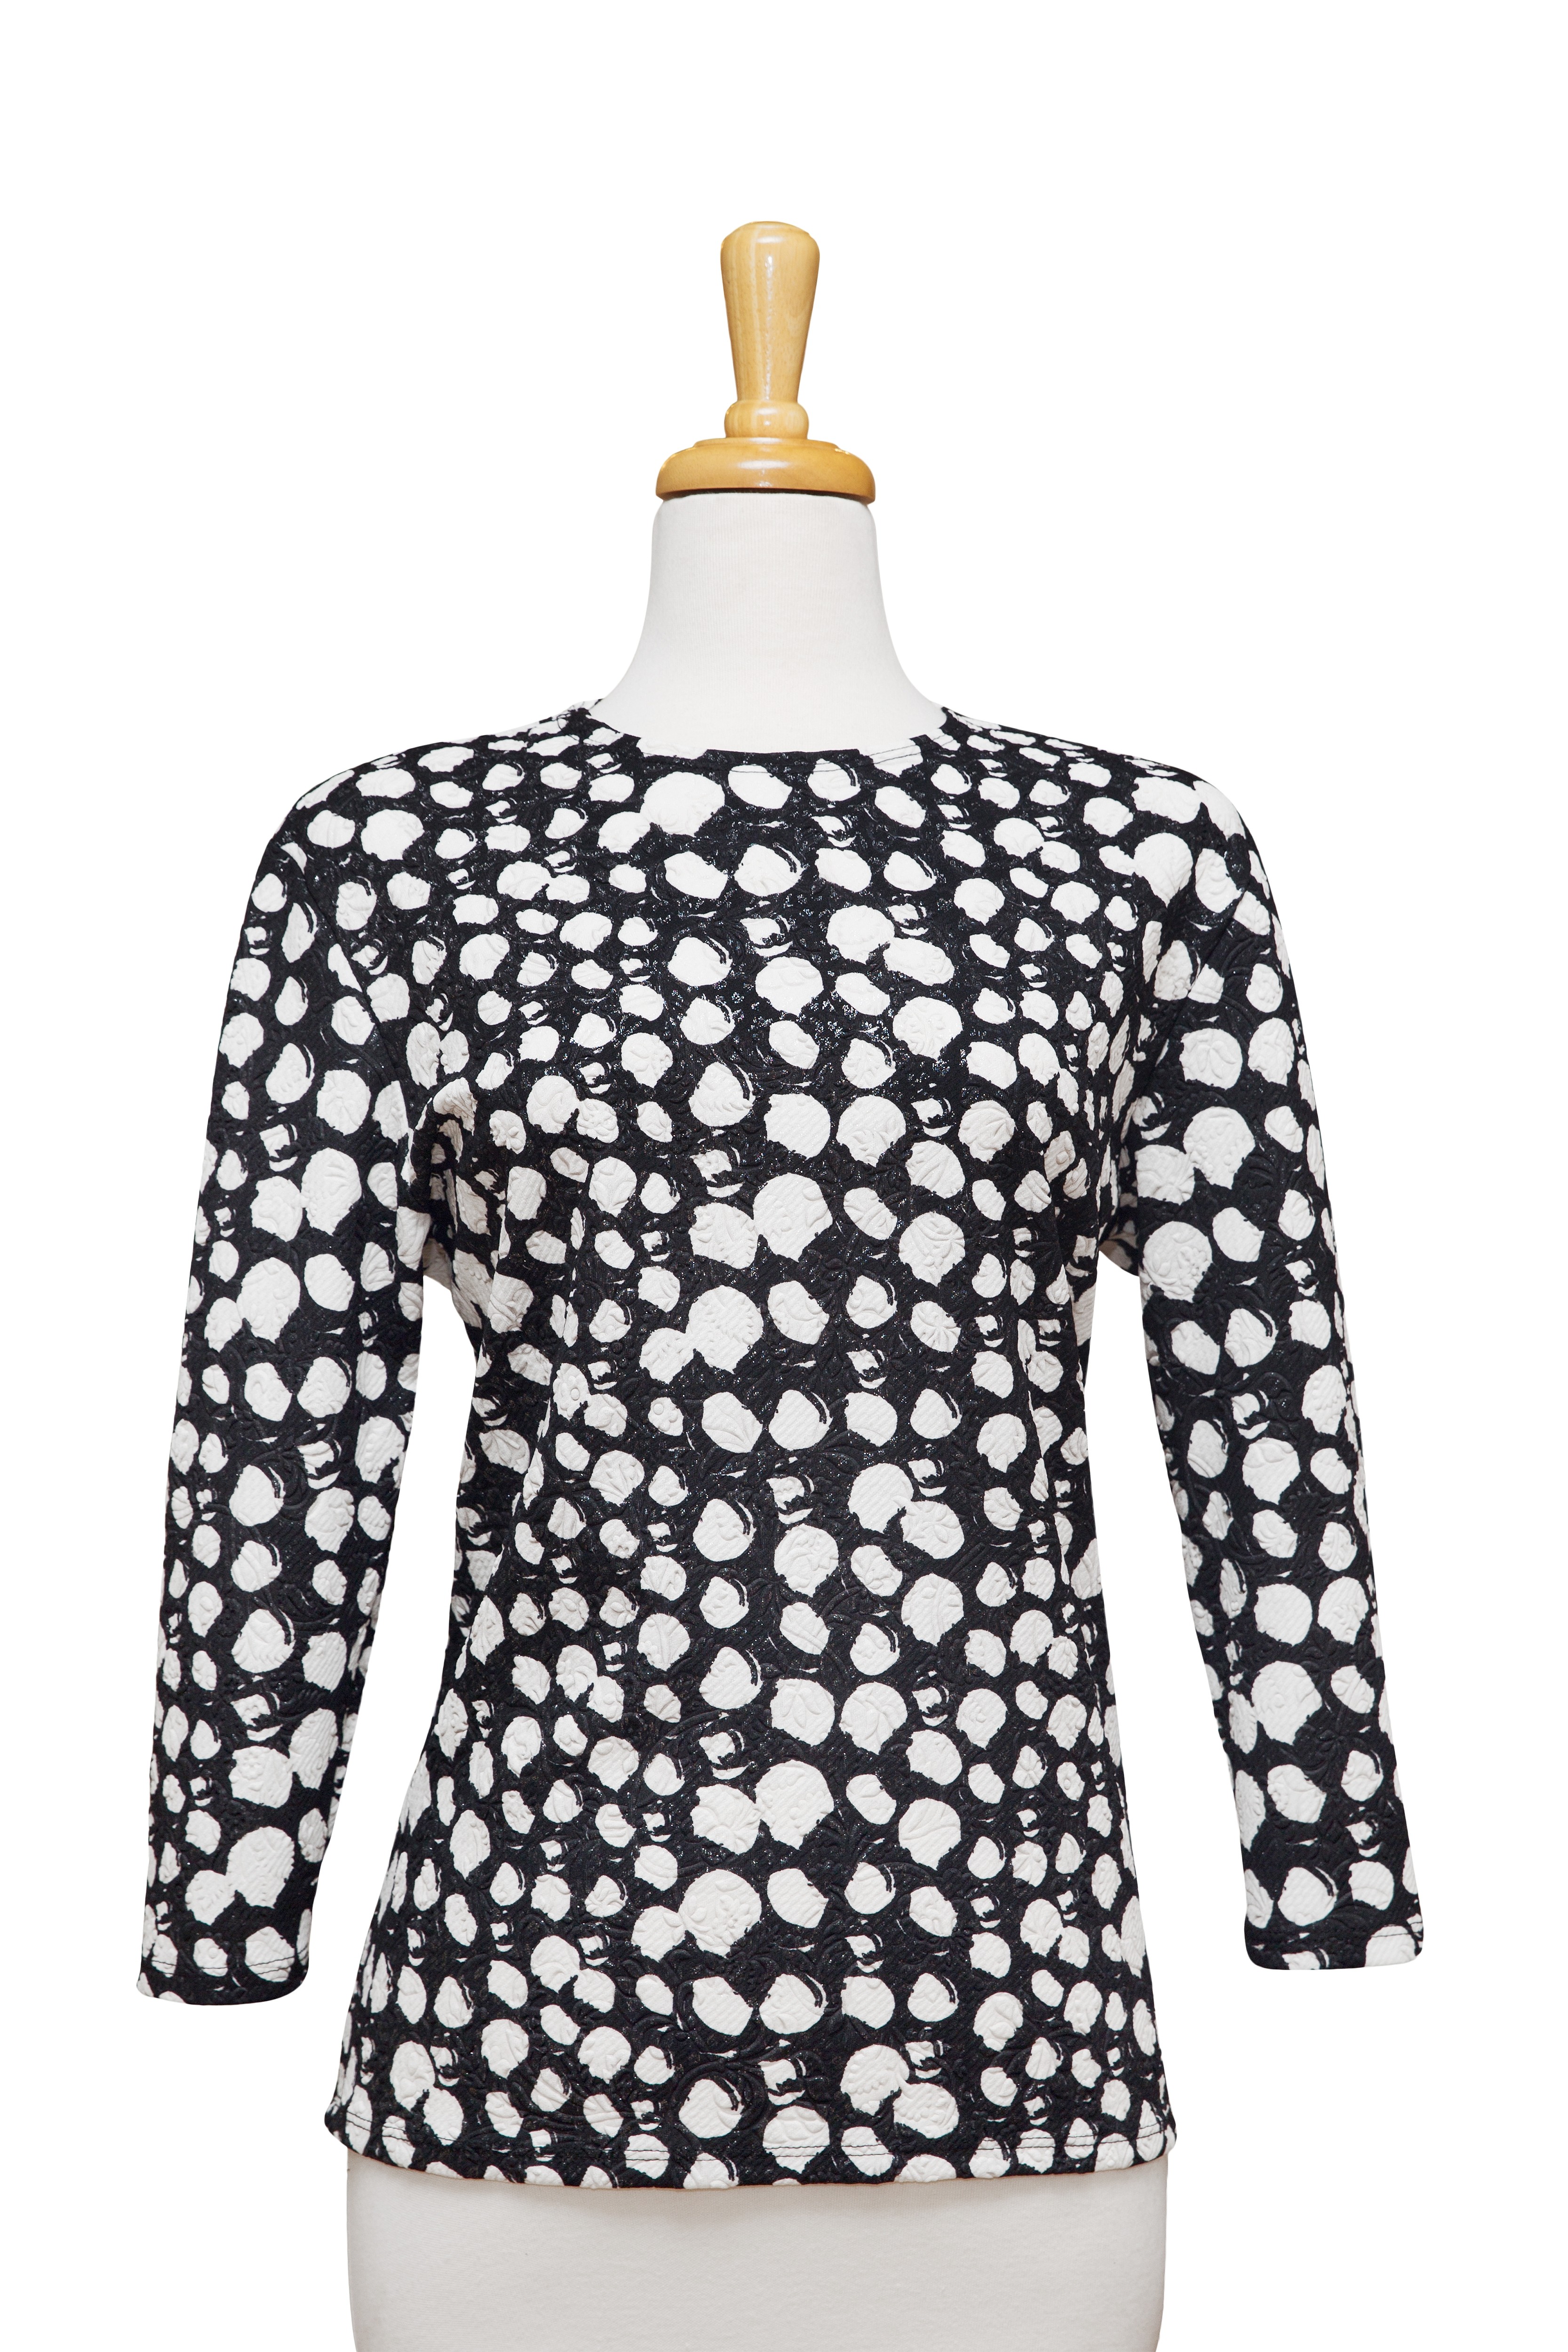 Black, and White Dots Brocade Textured 3/4 Sleeve Top 